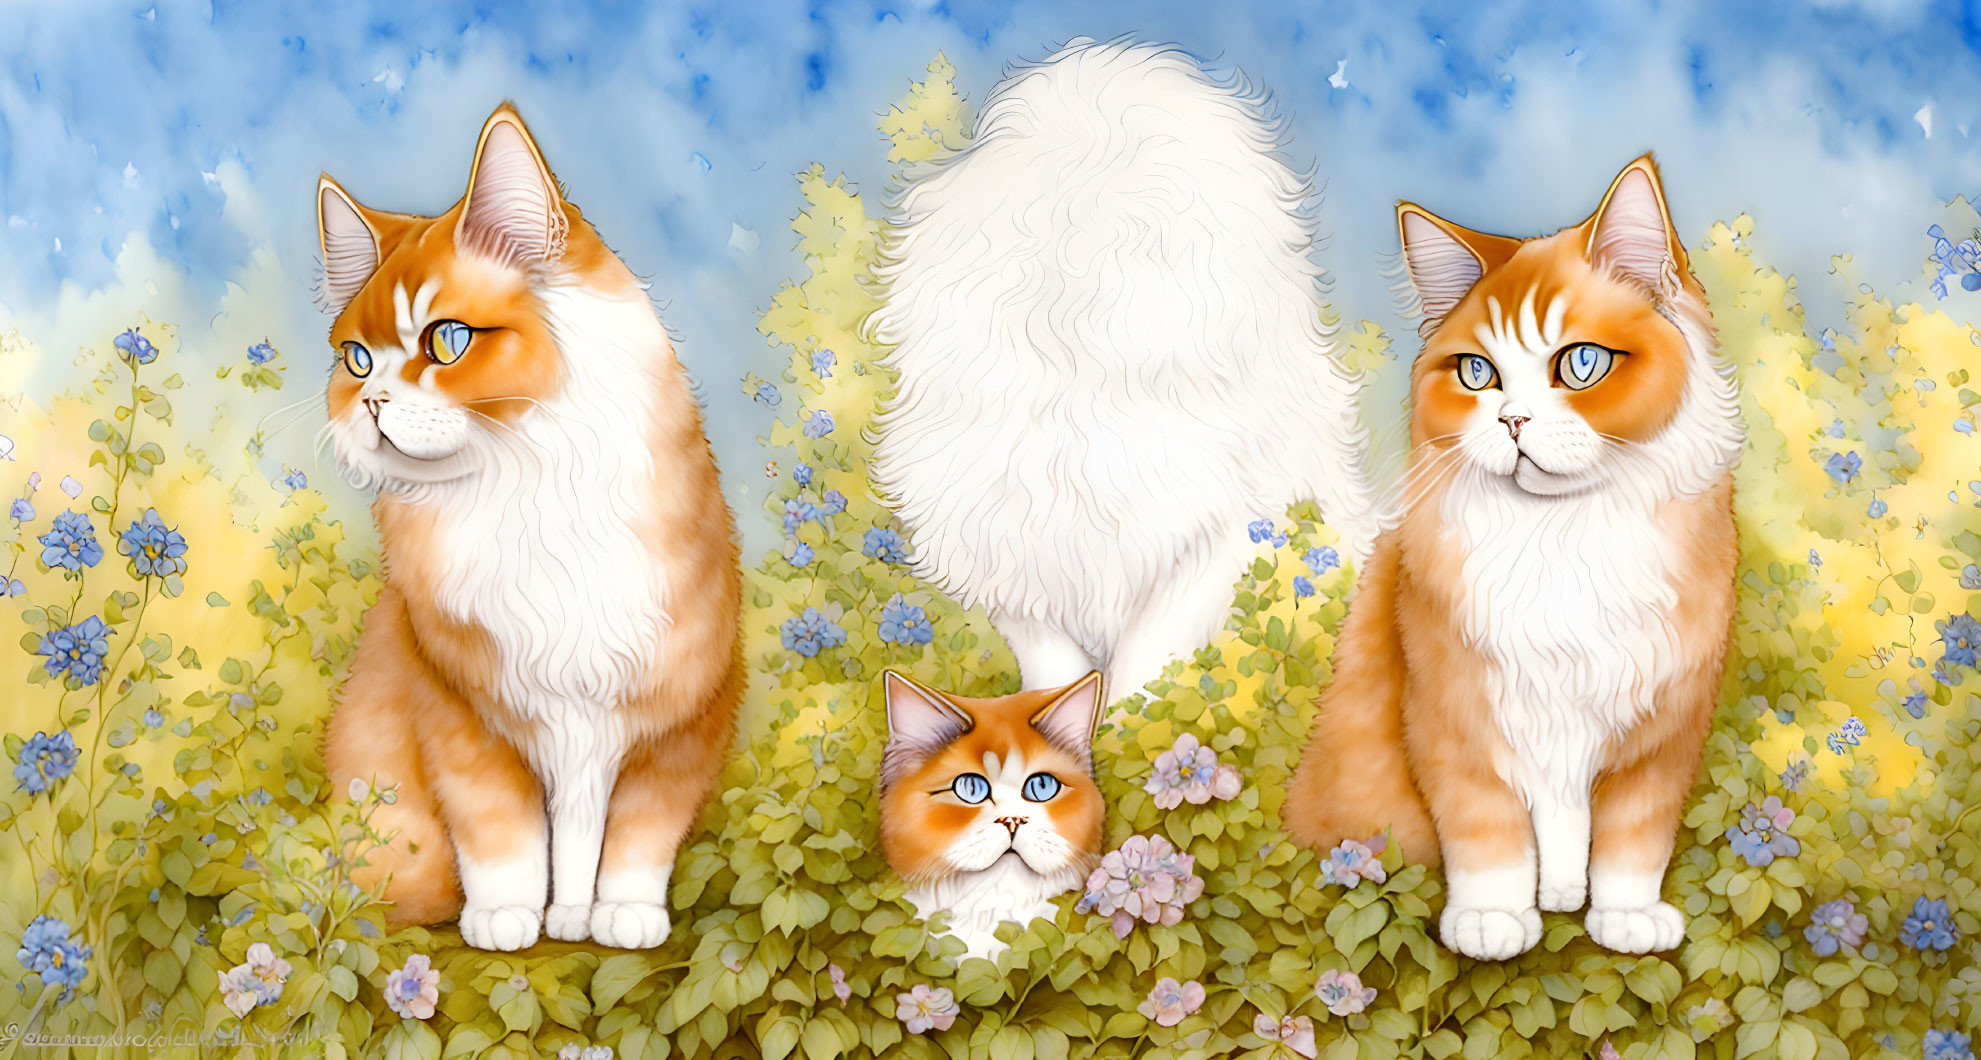 Three orange and white cats in colorful meadow with blue skies